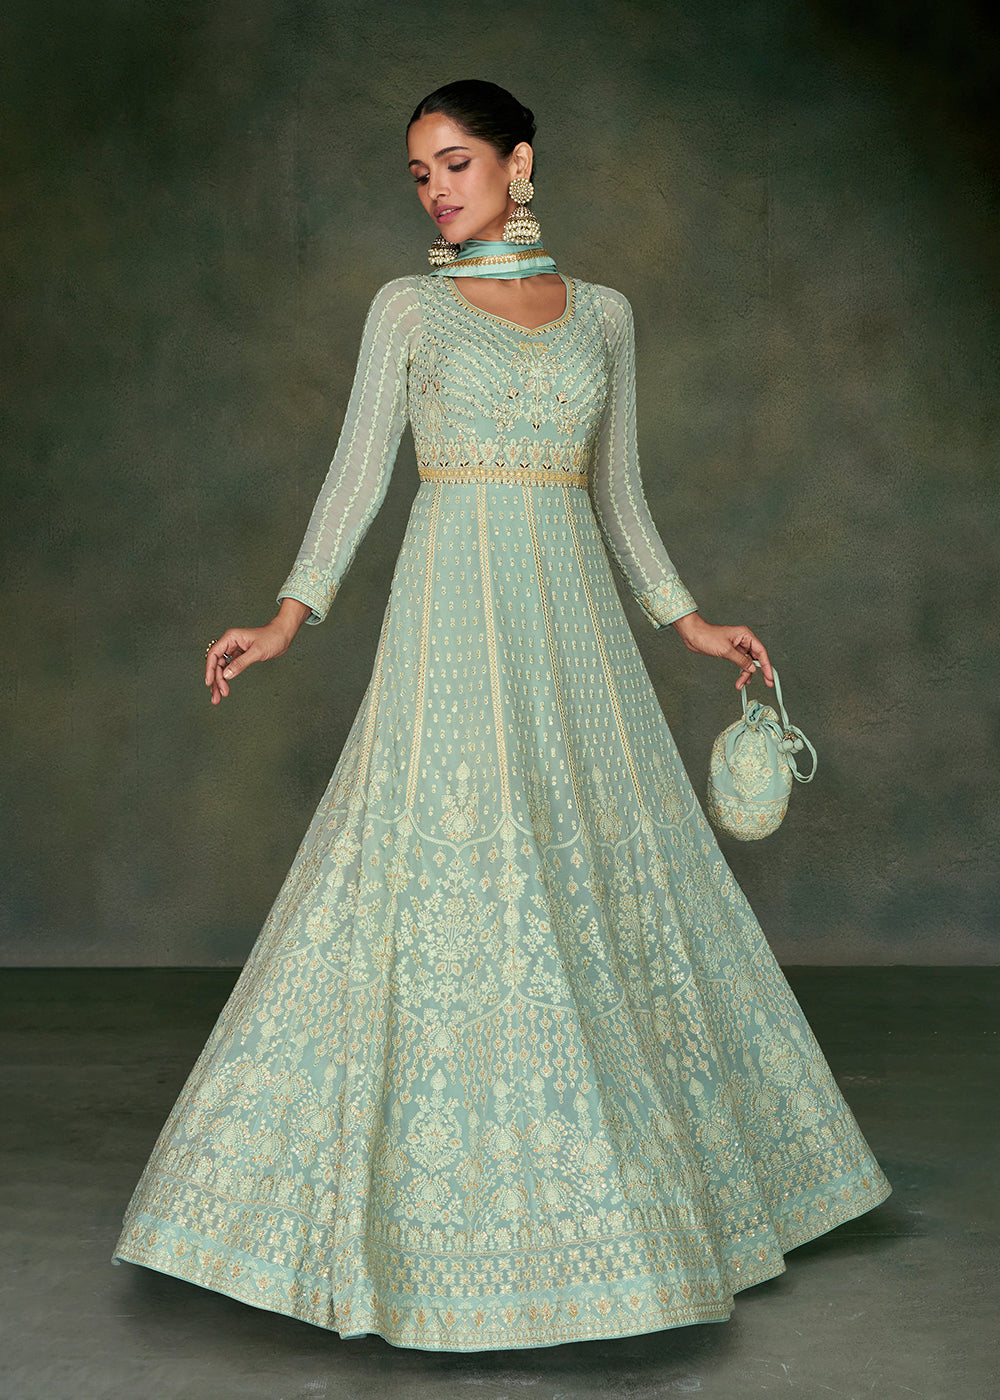 Buy Now Tempting Aqua Green Georgette Embroidered Wedding Anarkali Suit Online in USA, UK, Australia, New Zealand, Canada & Worldwide at Empress Clothing. 